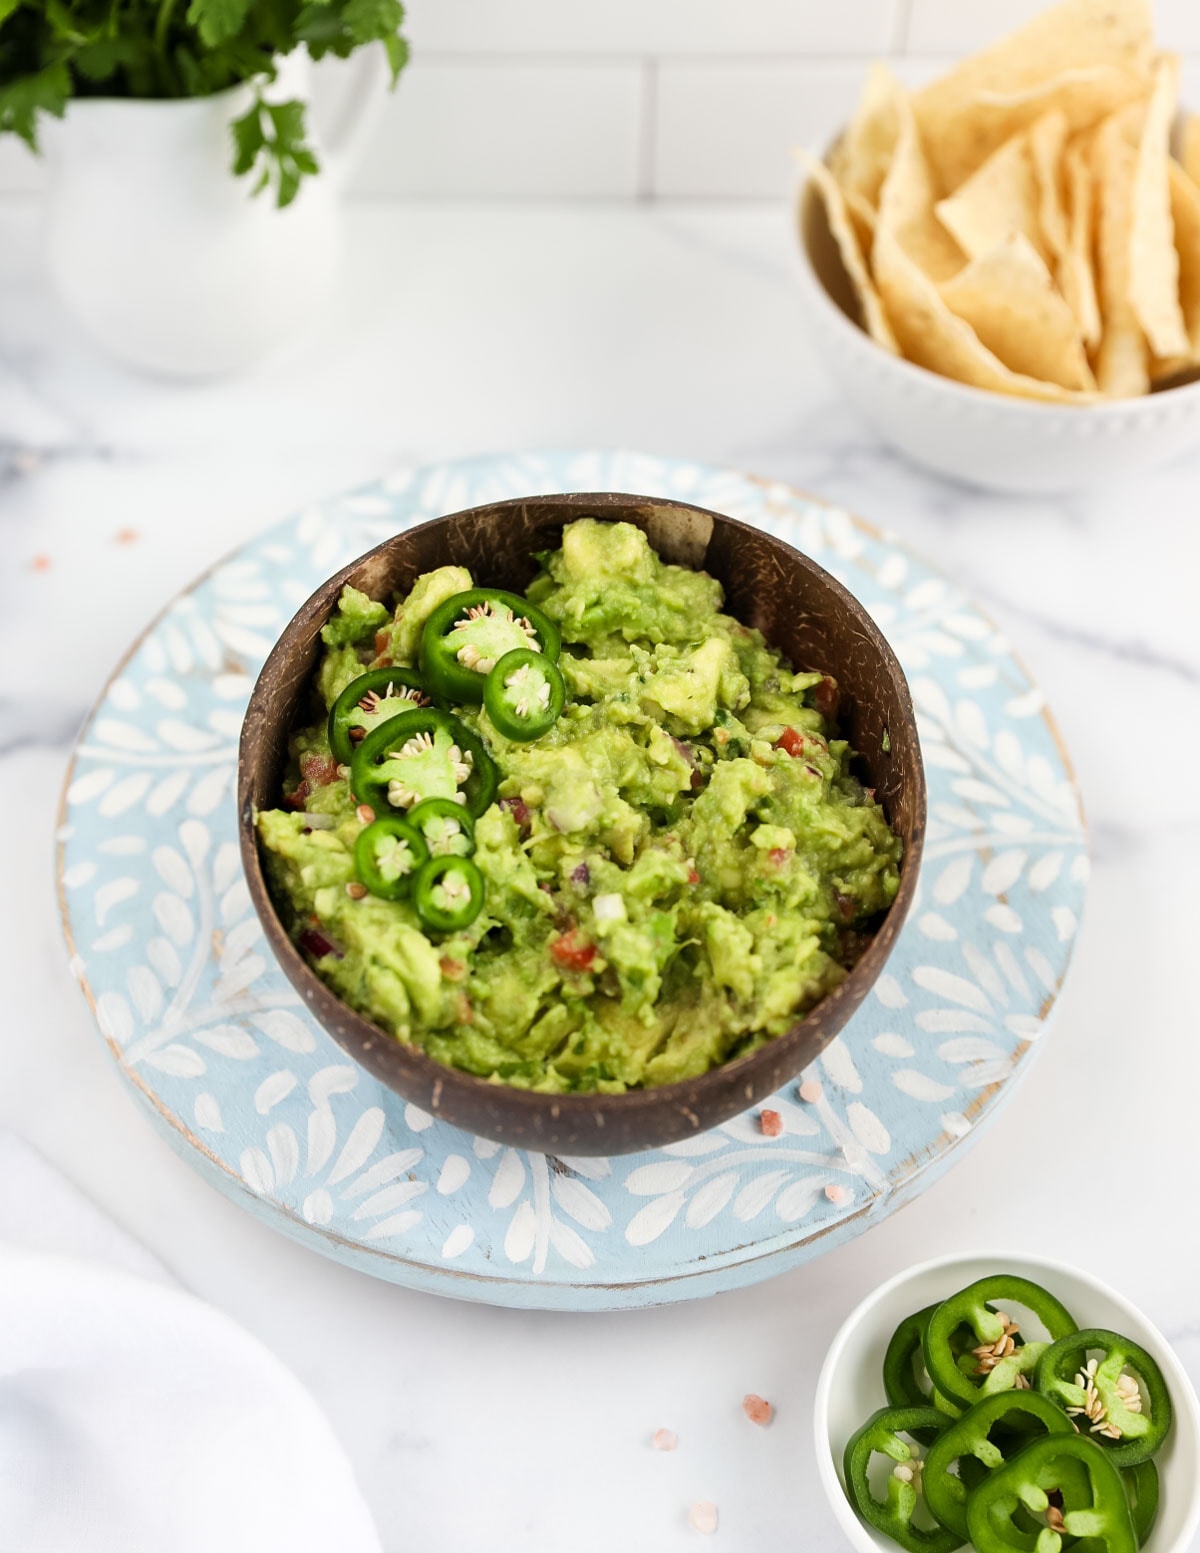 A brown coconut bowl filled with fresh green guacamole, garnished with jalapeno peppers.